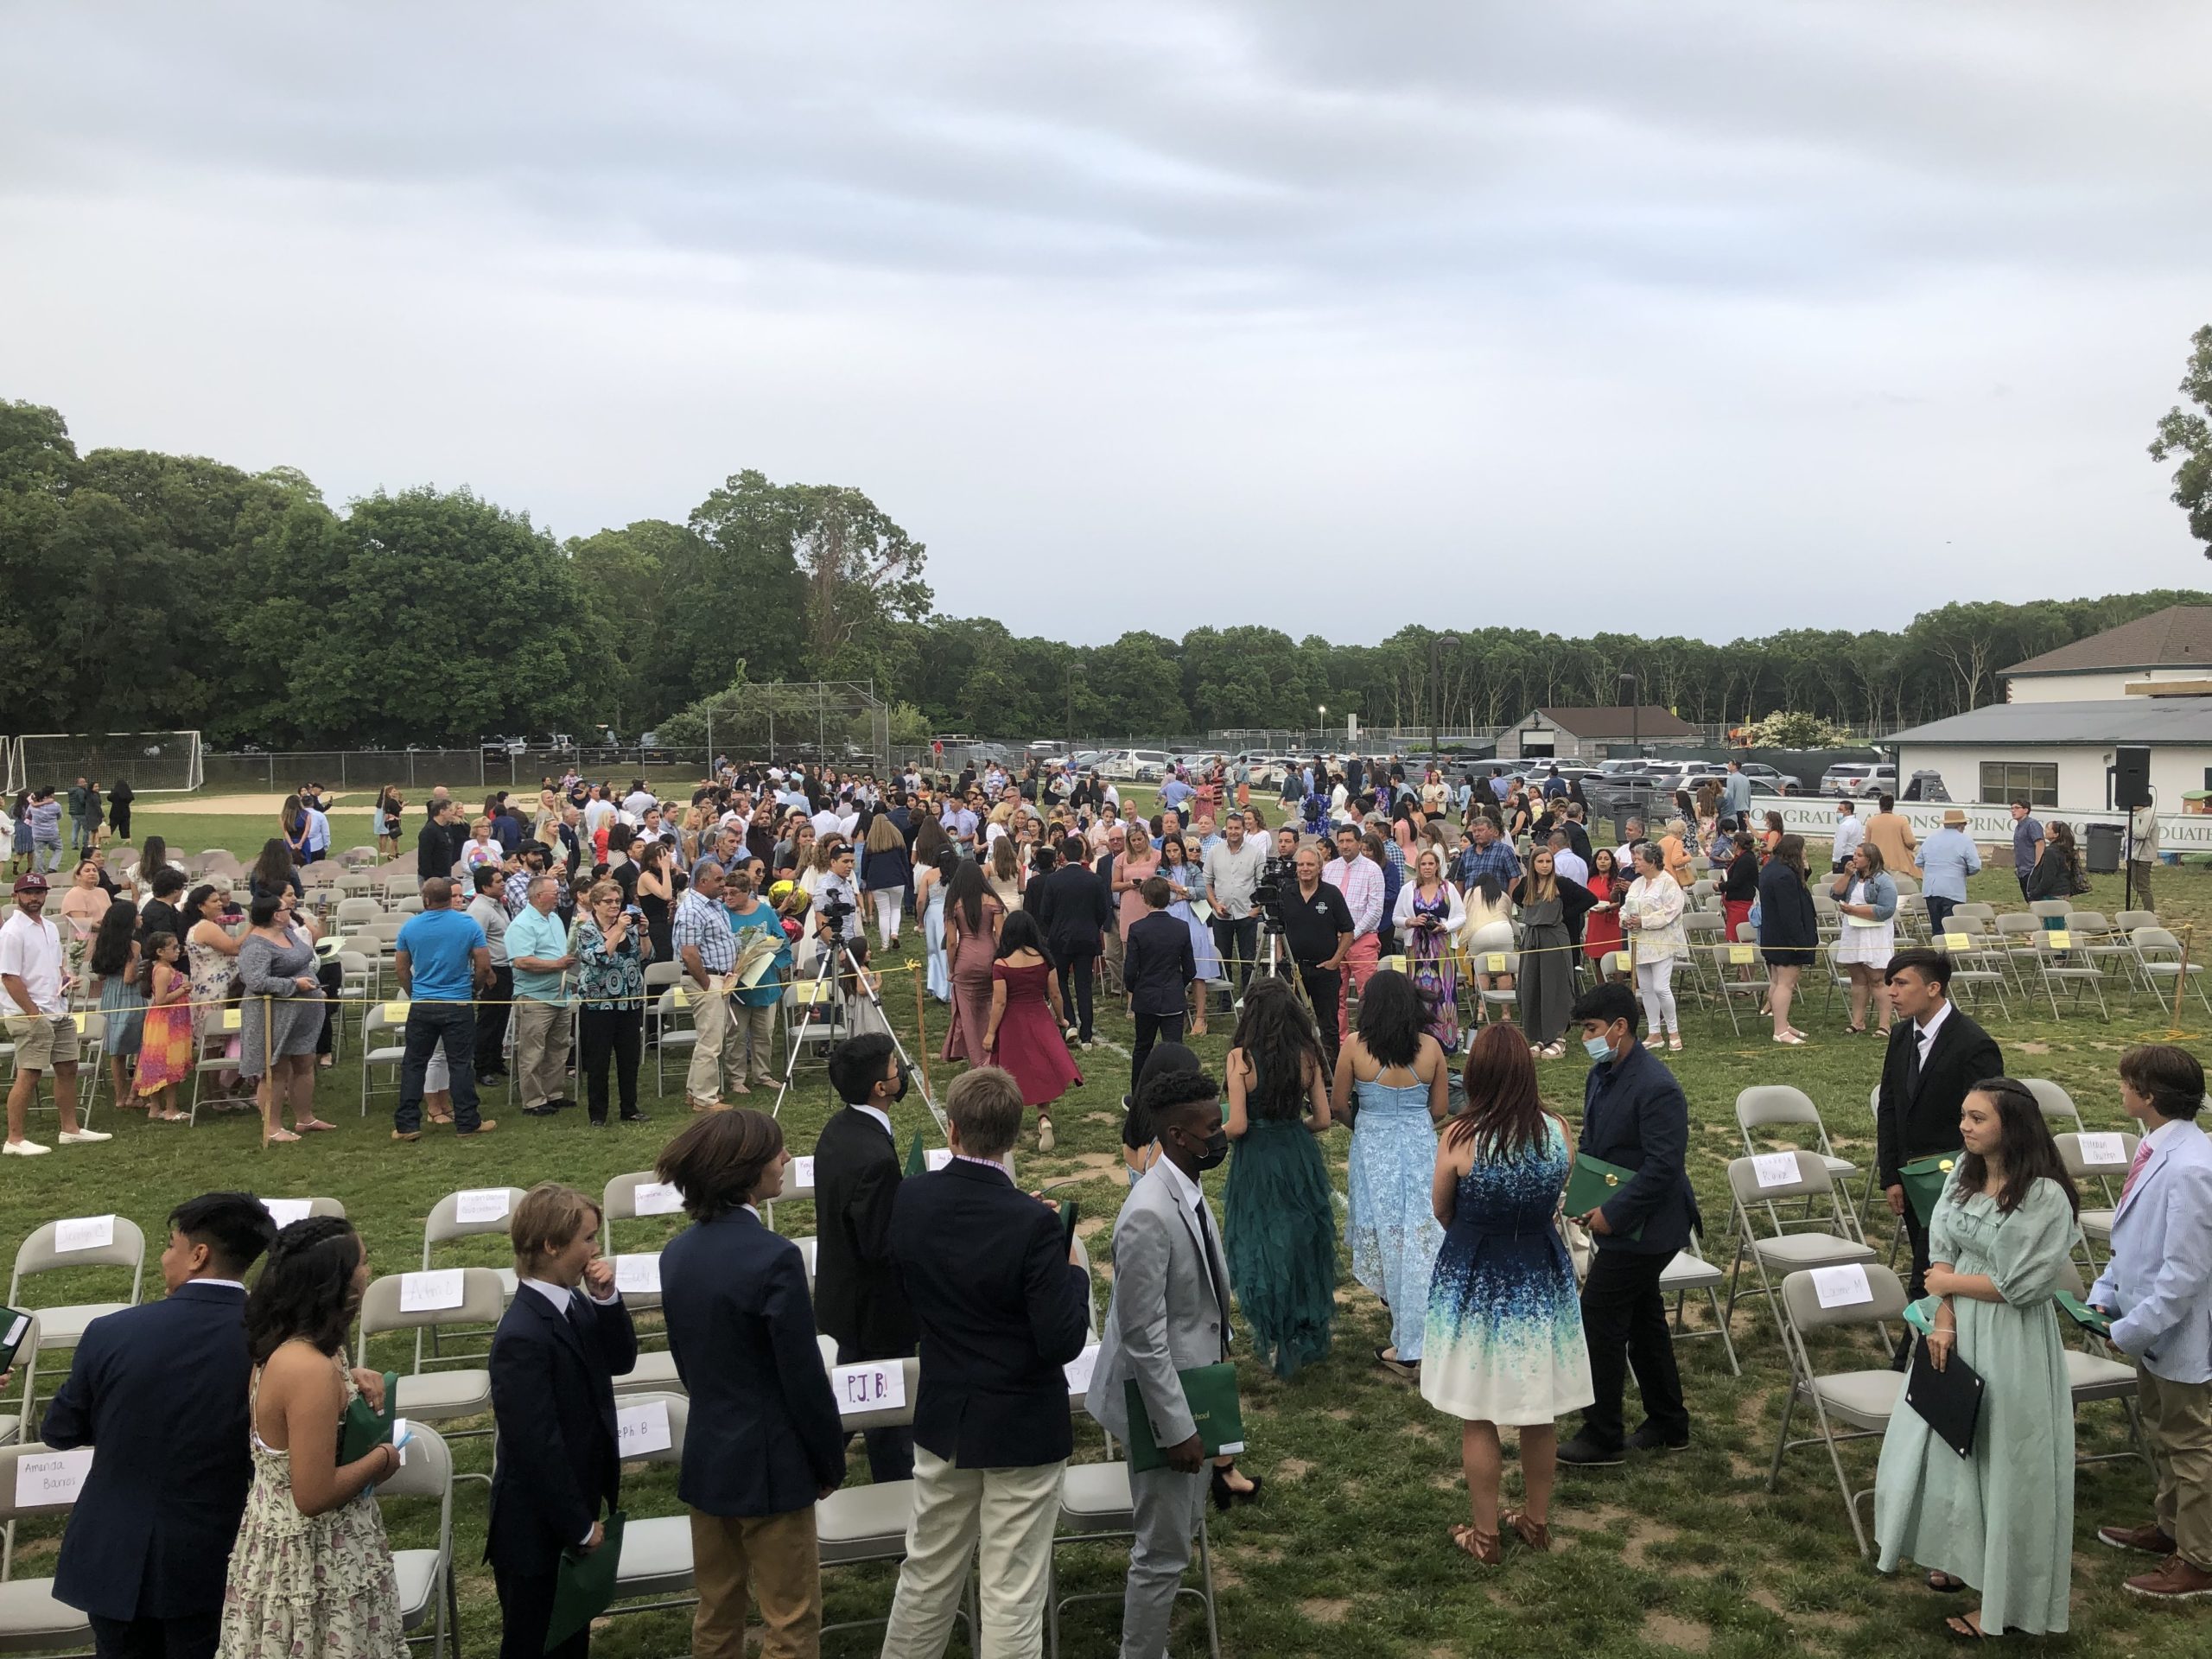 Students file out of eighth grade graduation on Saturday, June 26. The eighth grade were treated to a graduation ceremony on school grounds as well as an evening banquet.